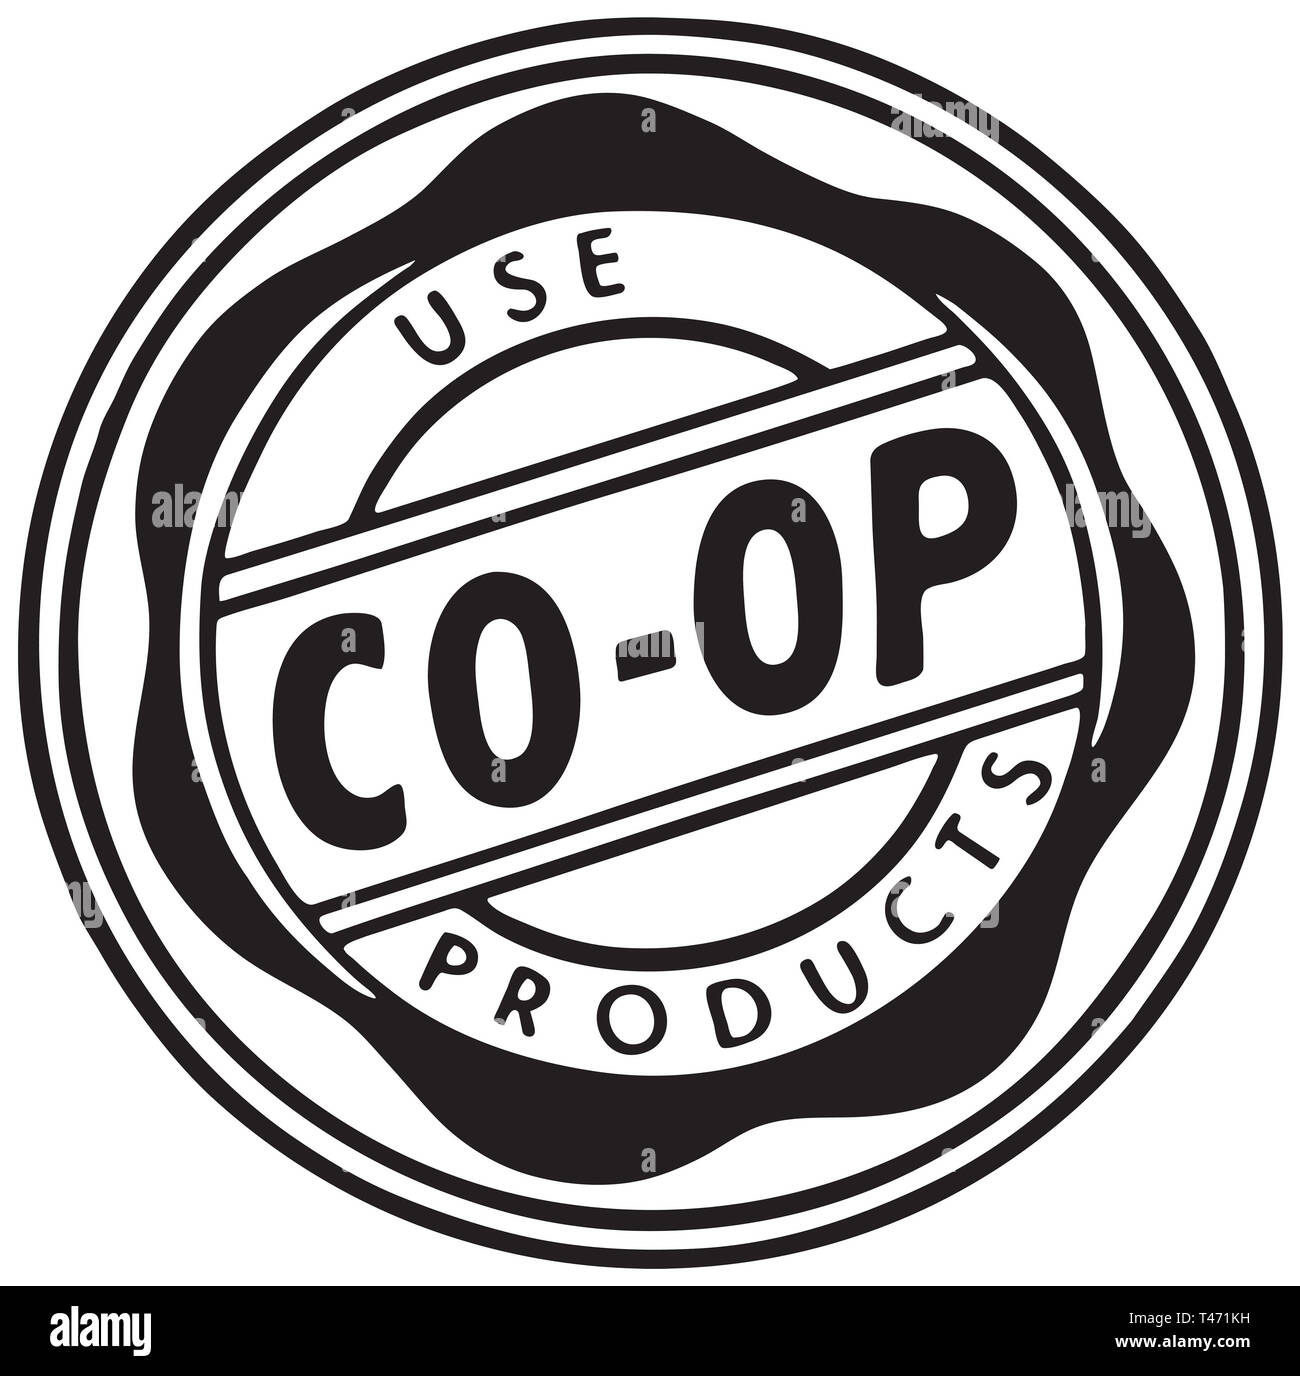 Use Coop Products Stock Photo